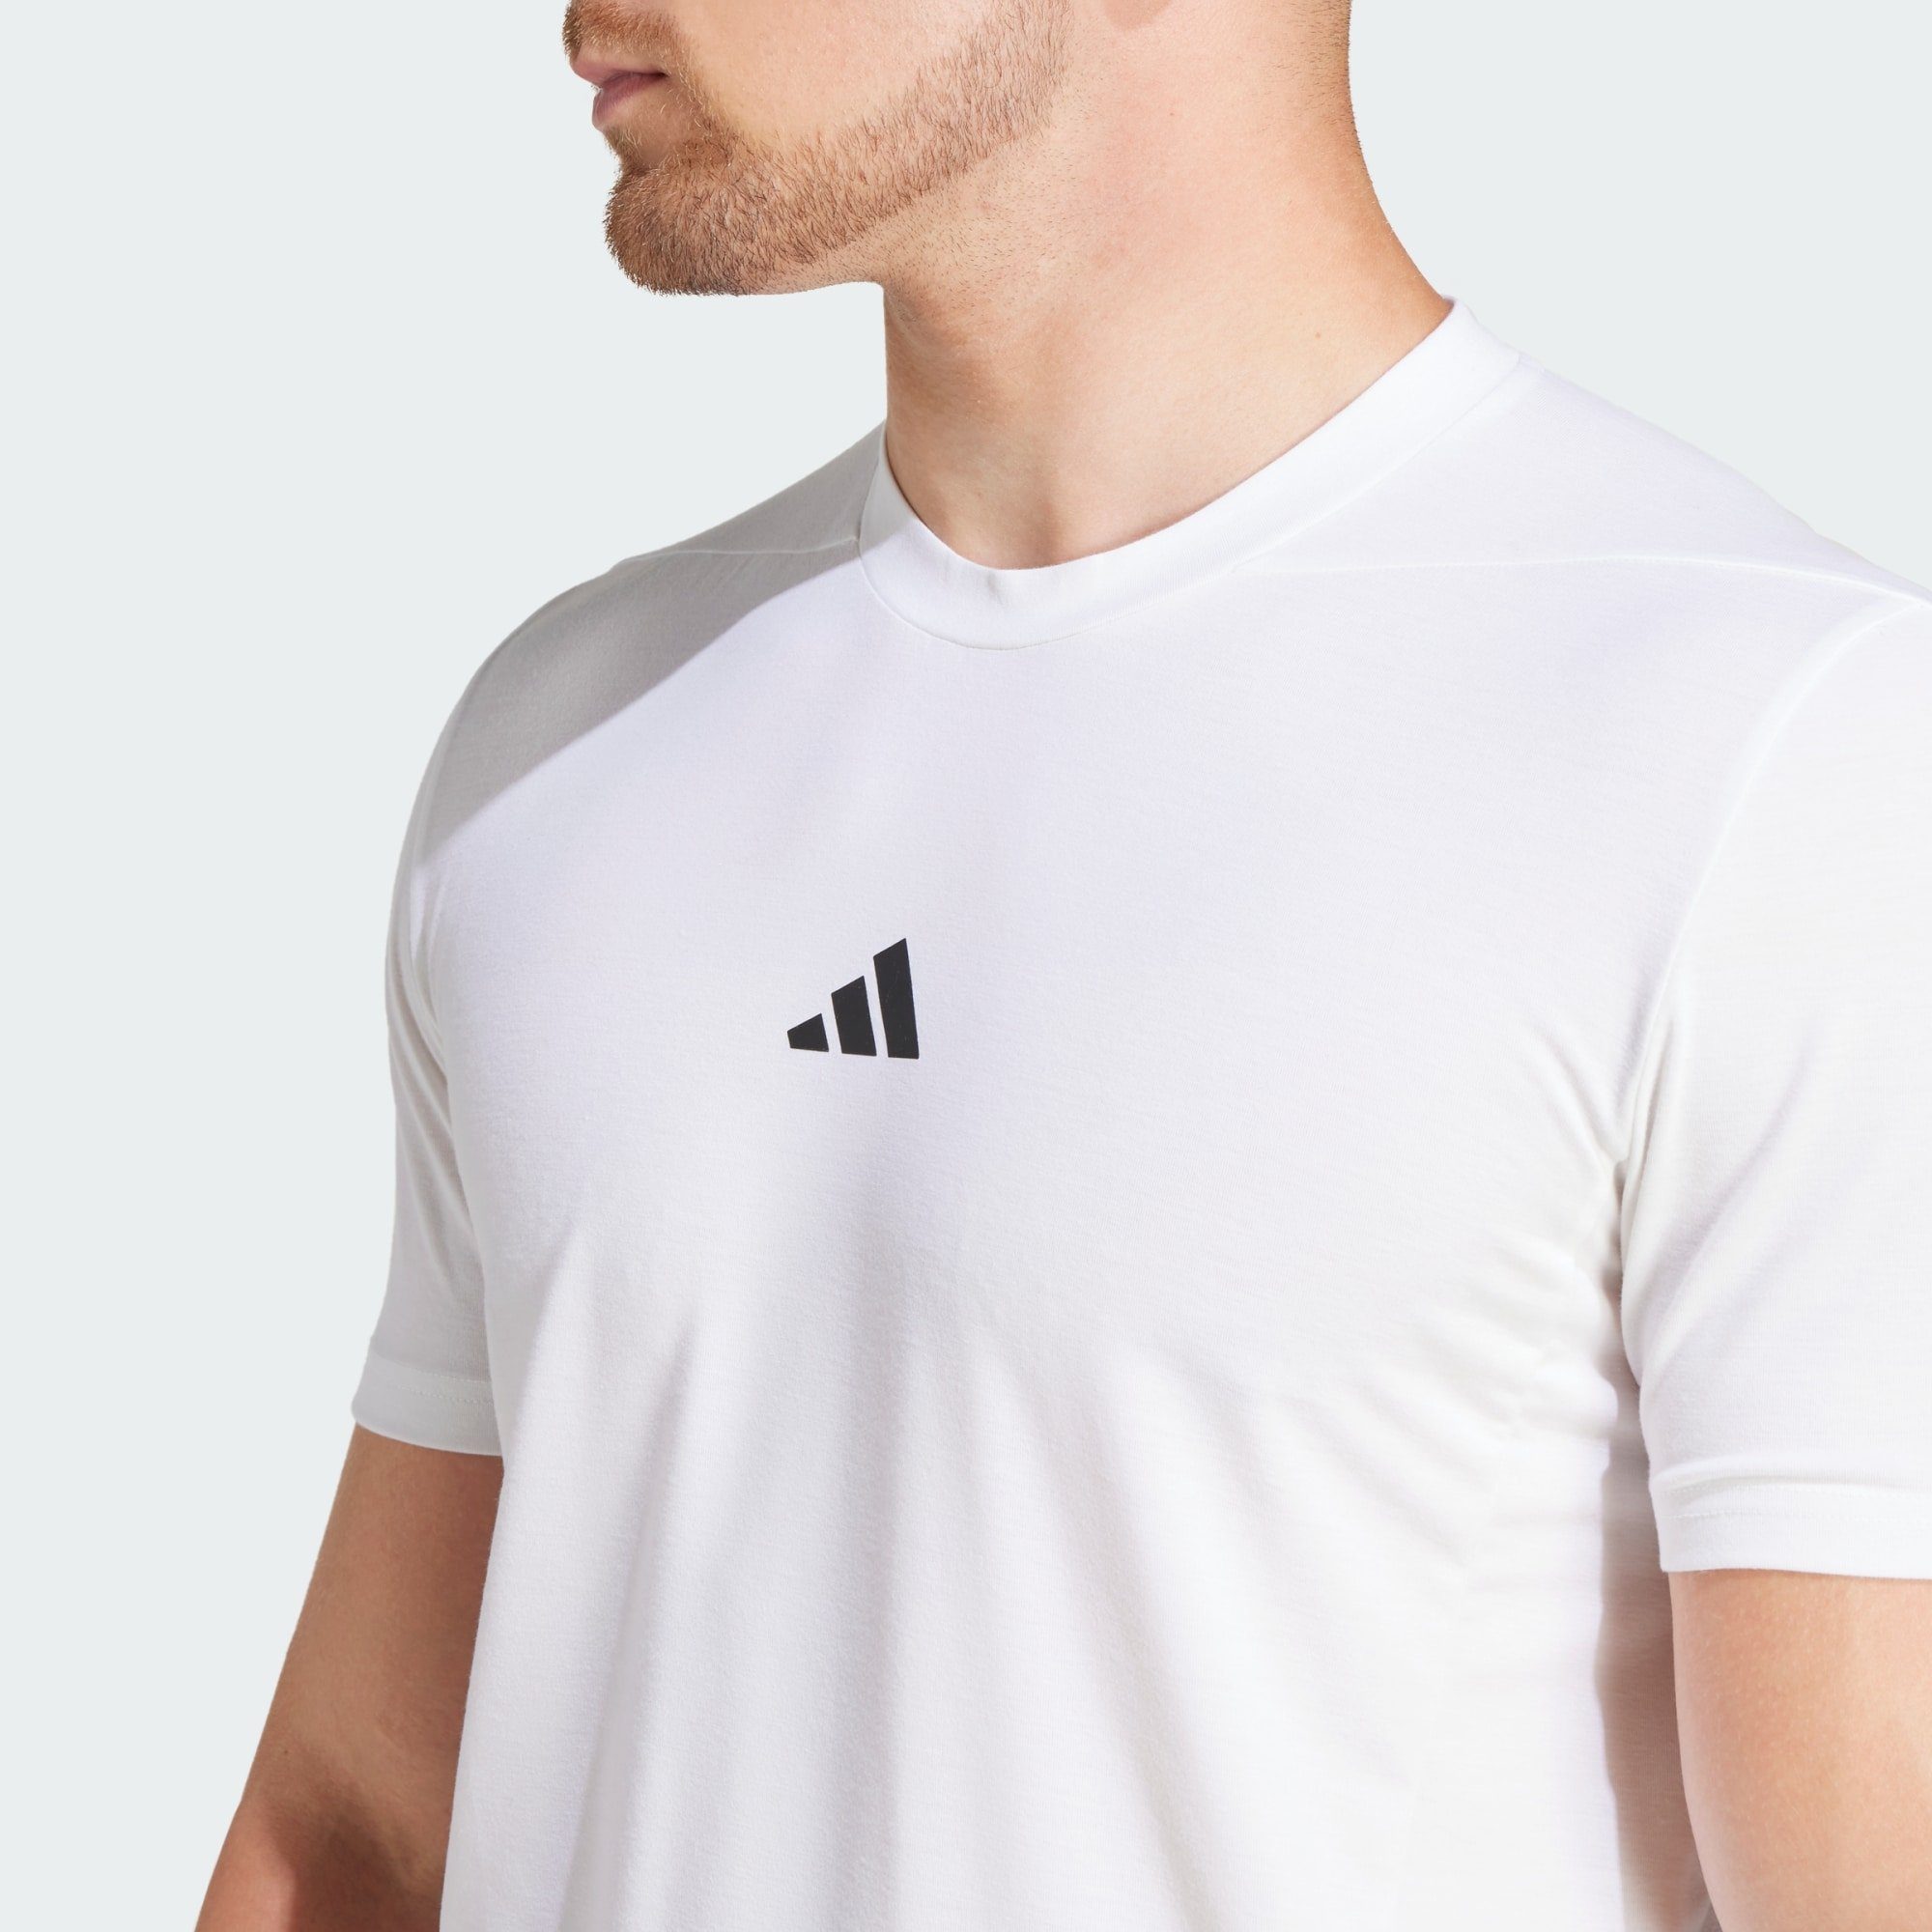 WORKOUT FOR White T-SHIRT Funktionsshirt TRAINING DESIGNED adidas Performance